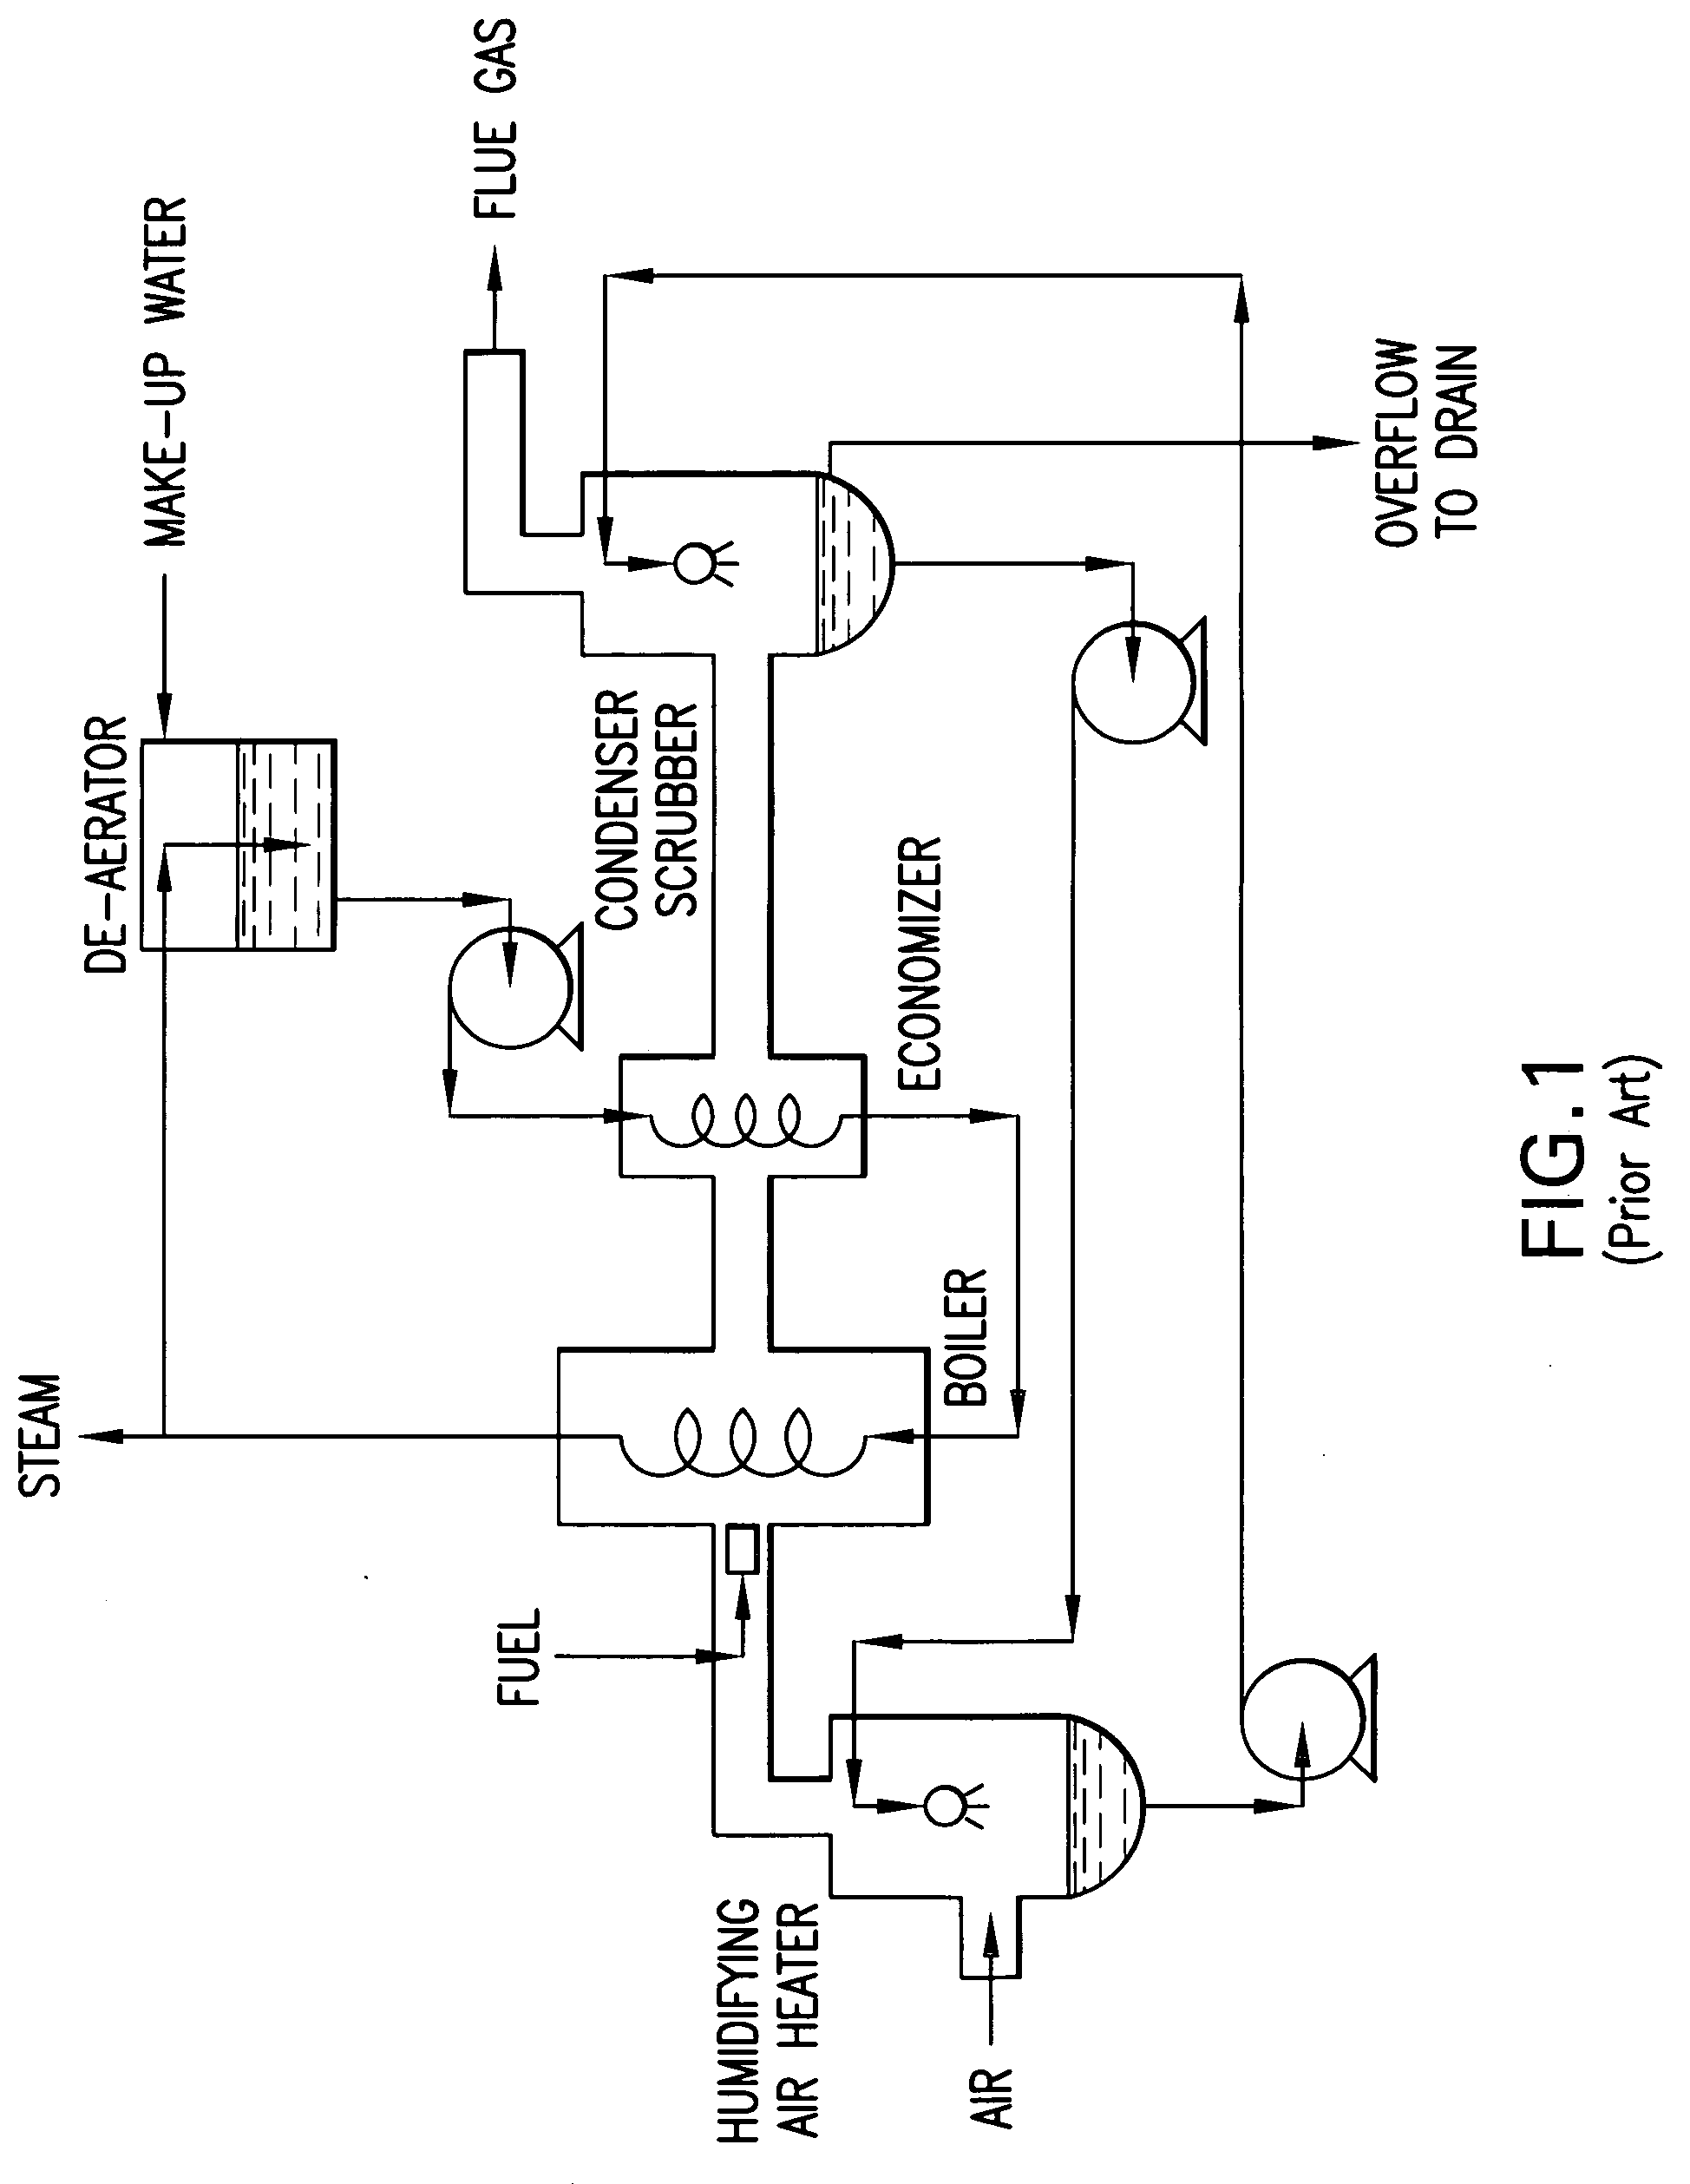 Method and apparatus for enhanced heat recovery from steam generators and water heaters